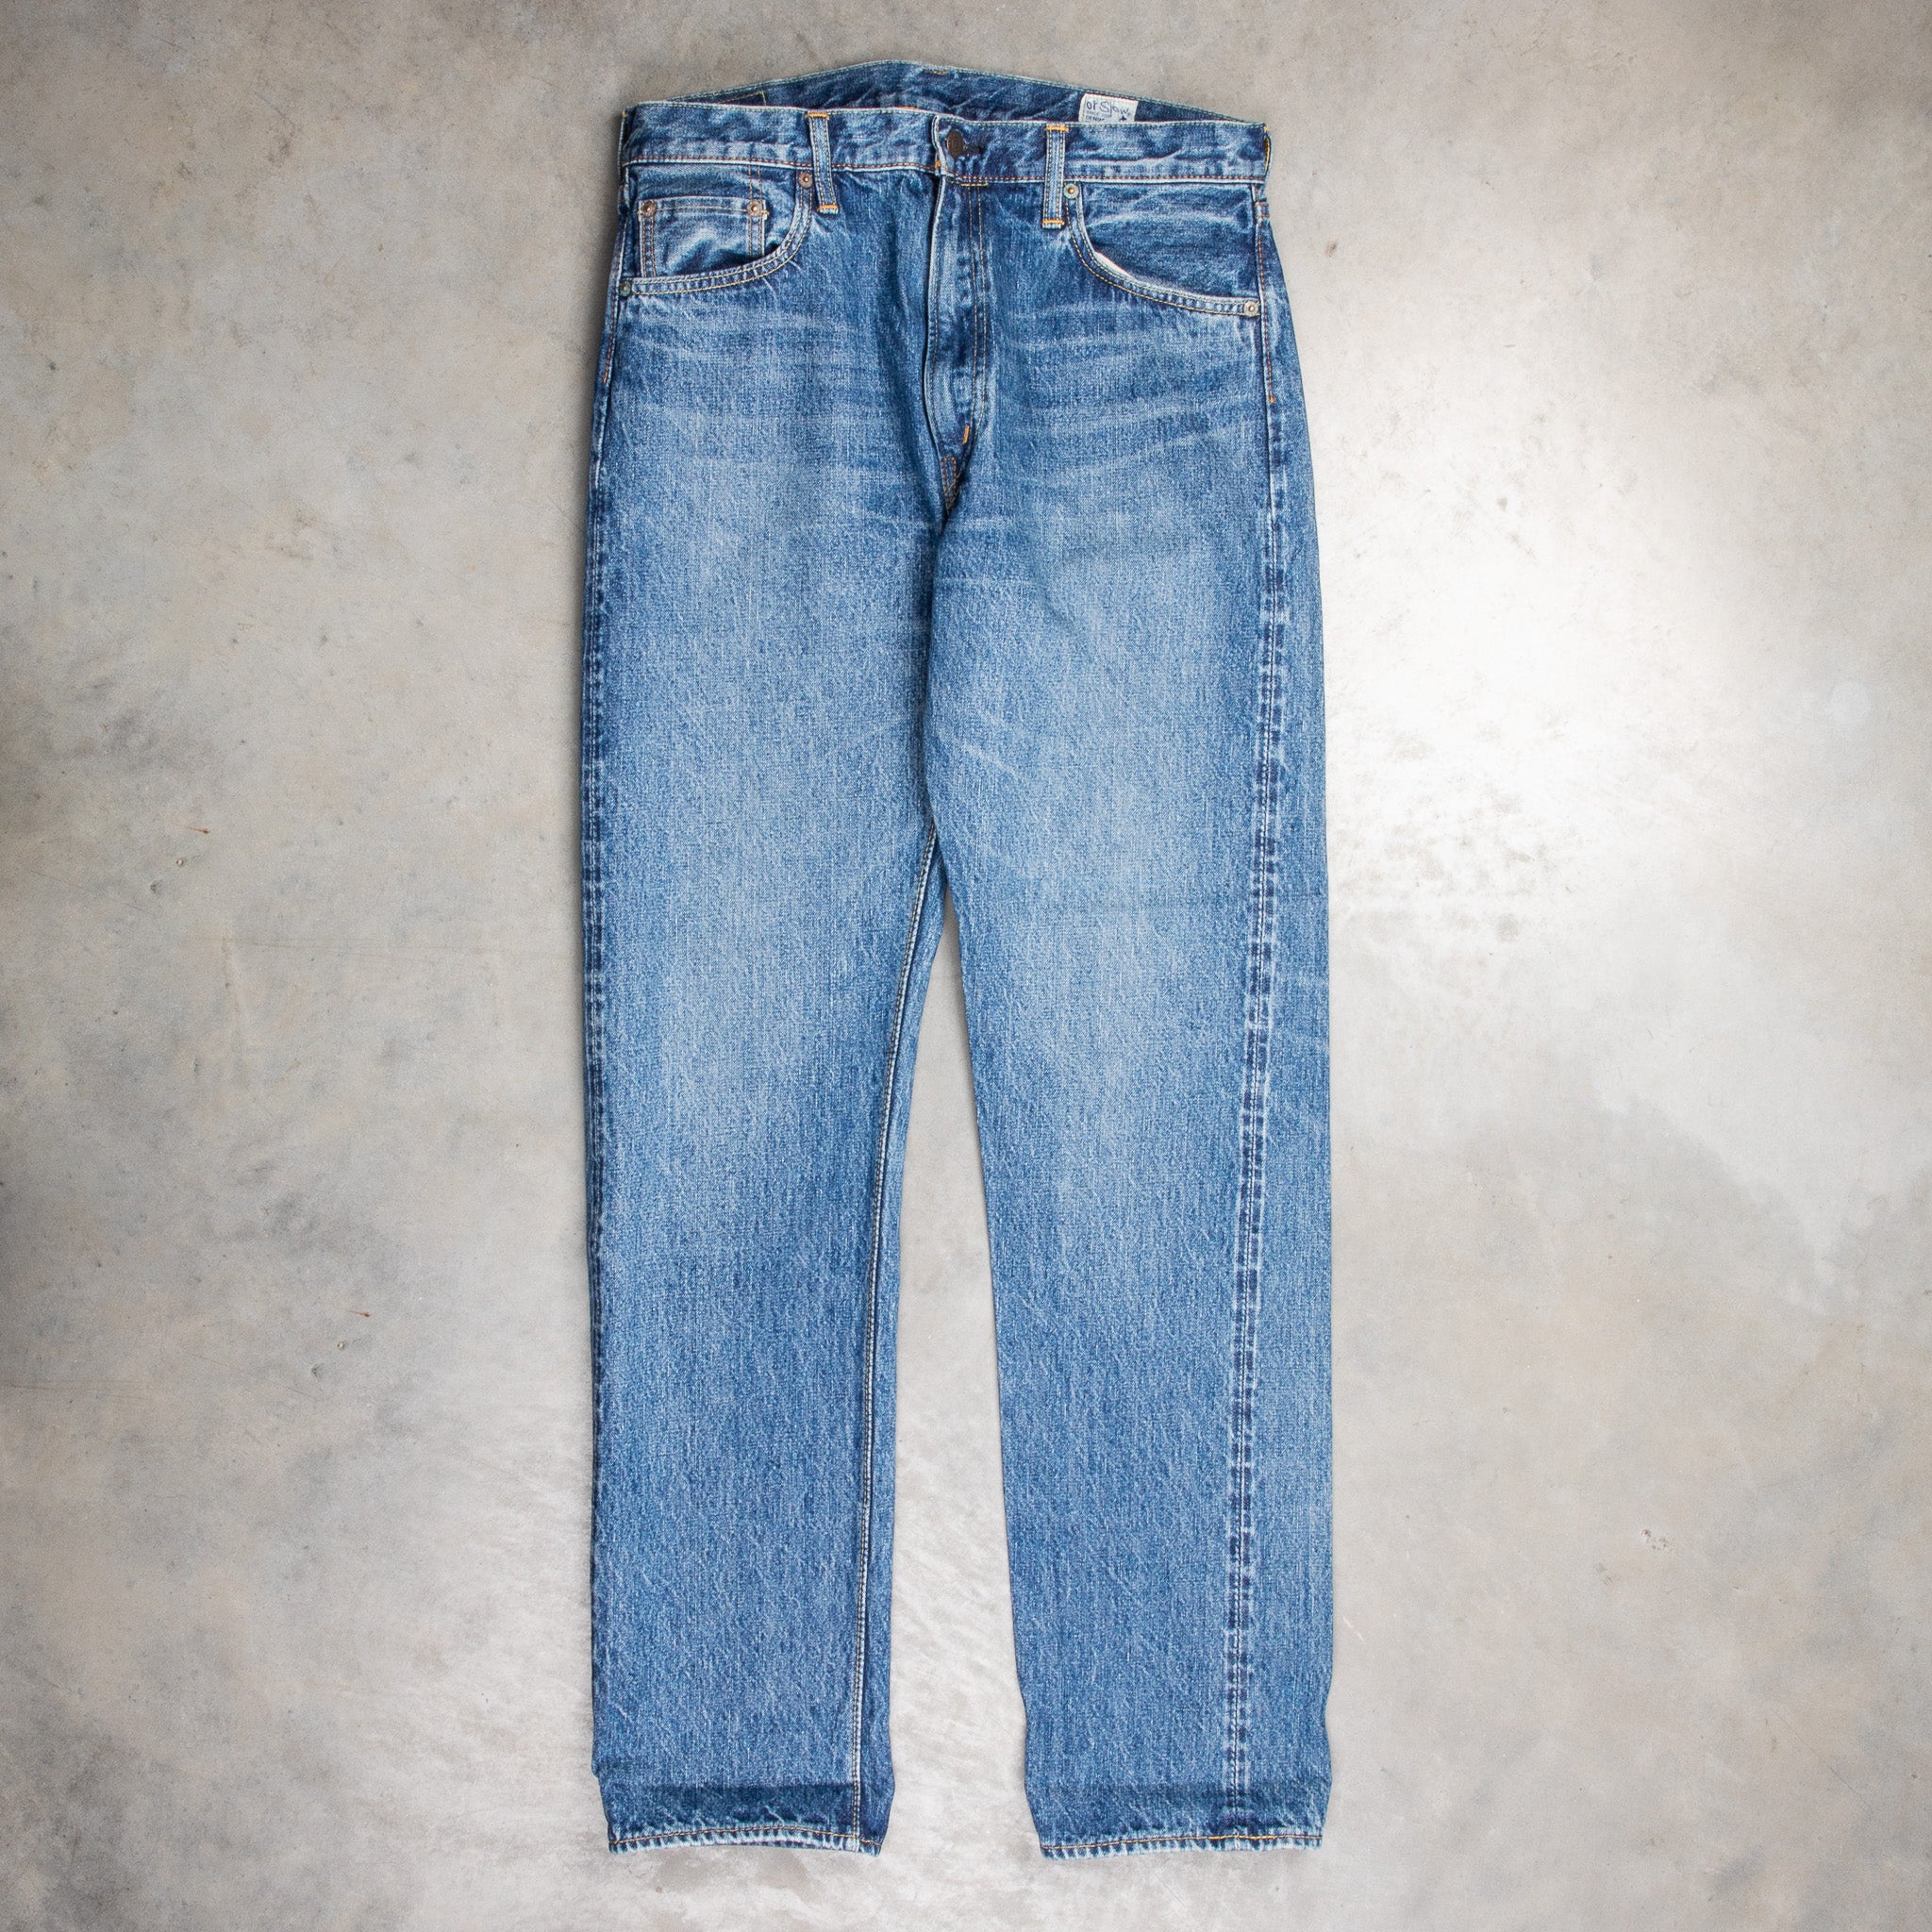 OrSlow 107 Ivy Fit 2 Year Wash